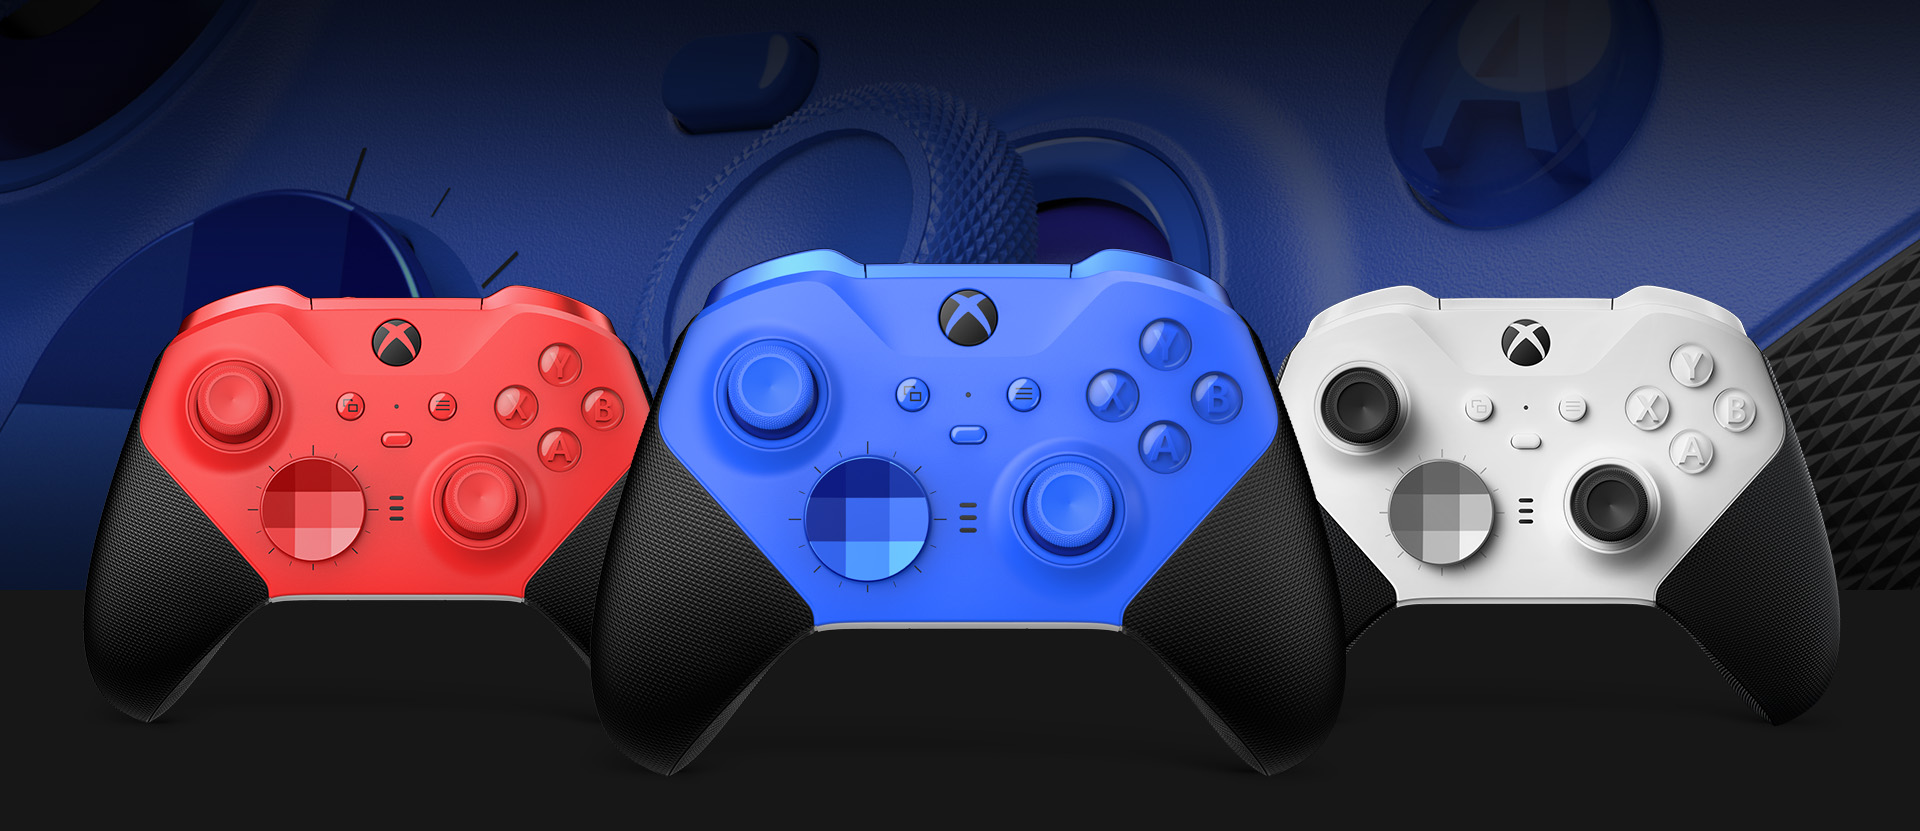 Front view of the Xbox Elite Wireless Controller Series 2 – Core (Blue) with other colour options shown alongside. A close-up of the controller thumbsticks and textured grip is in the background.